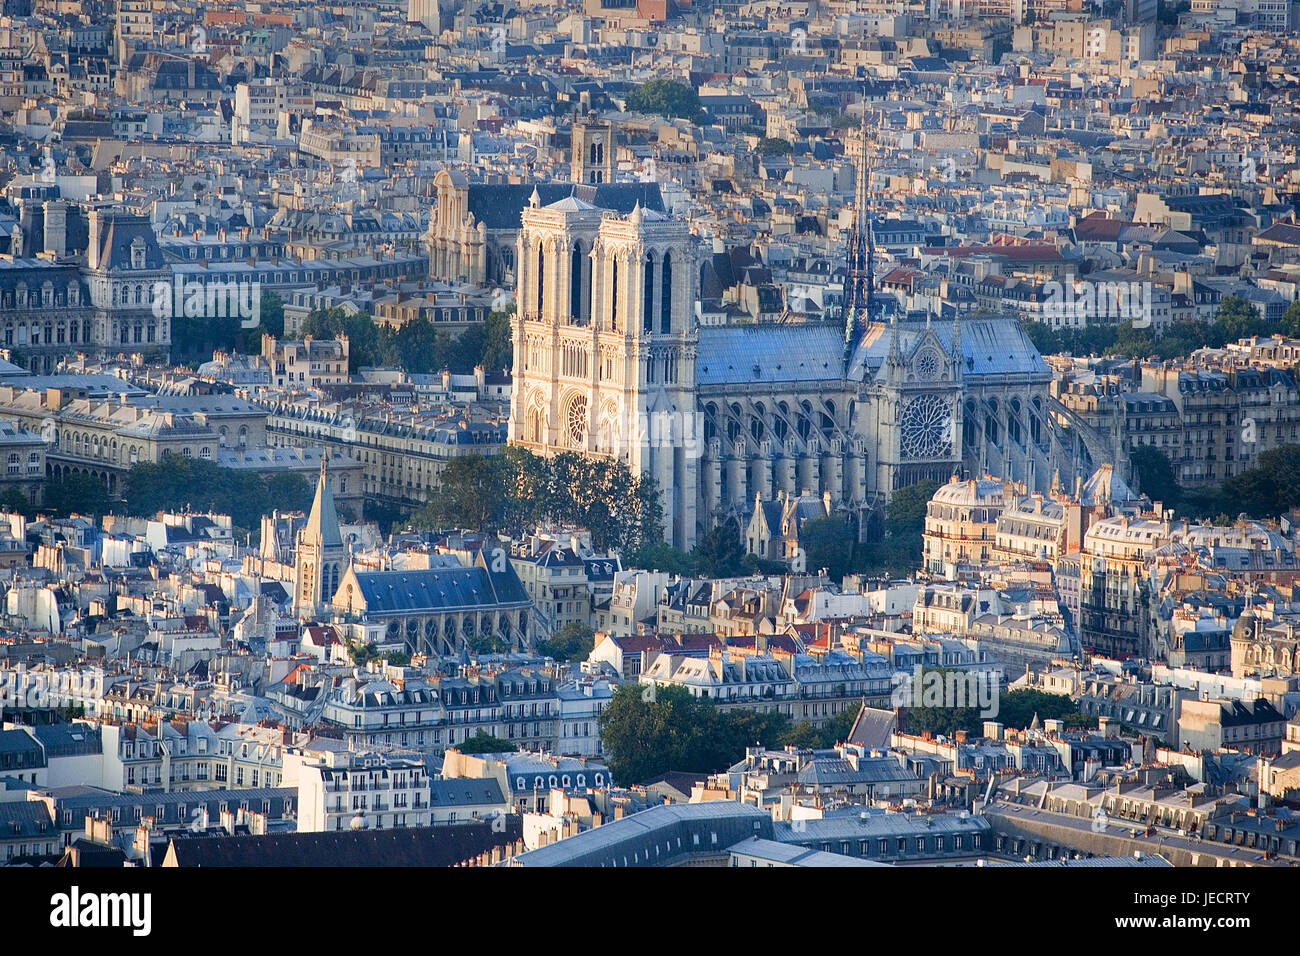 France, Paris, town view, cathedral Notre lady, capital, town, houses, buildings, church, structure, Gothic, sacred construction, Notre lady's cathedral, place of interest, landmark, destination, tourism, Stock Photo